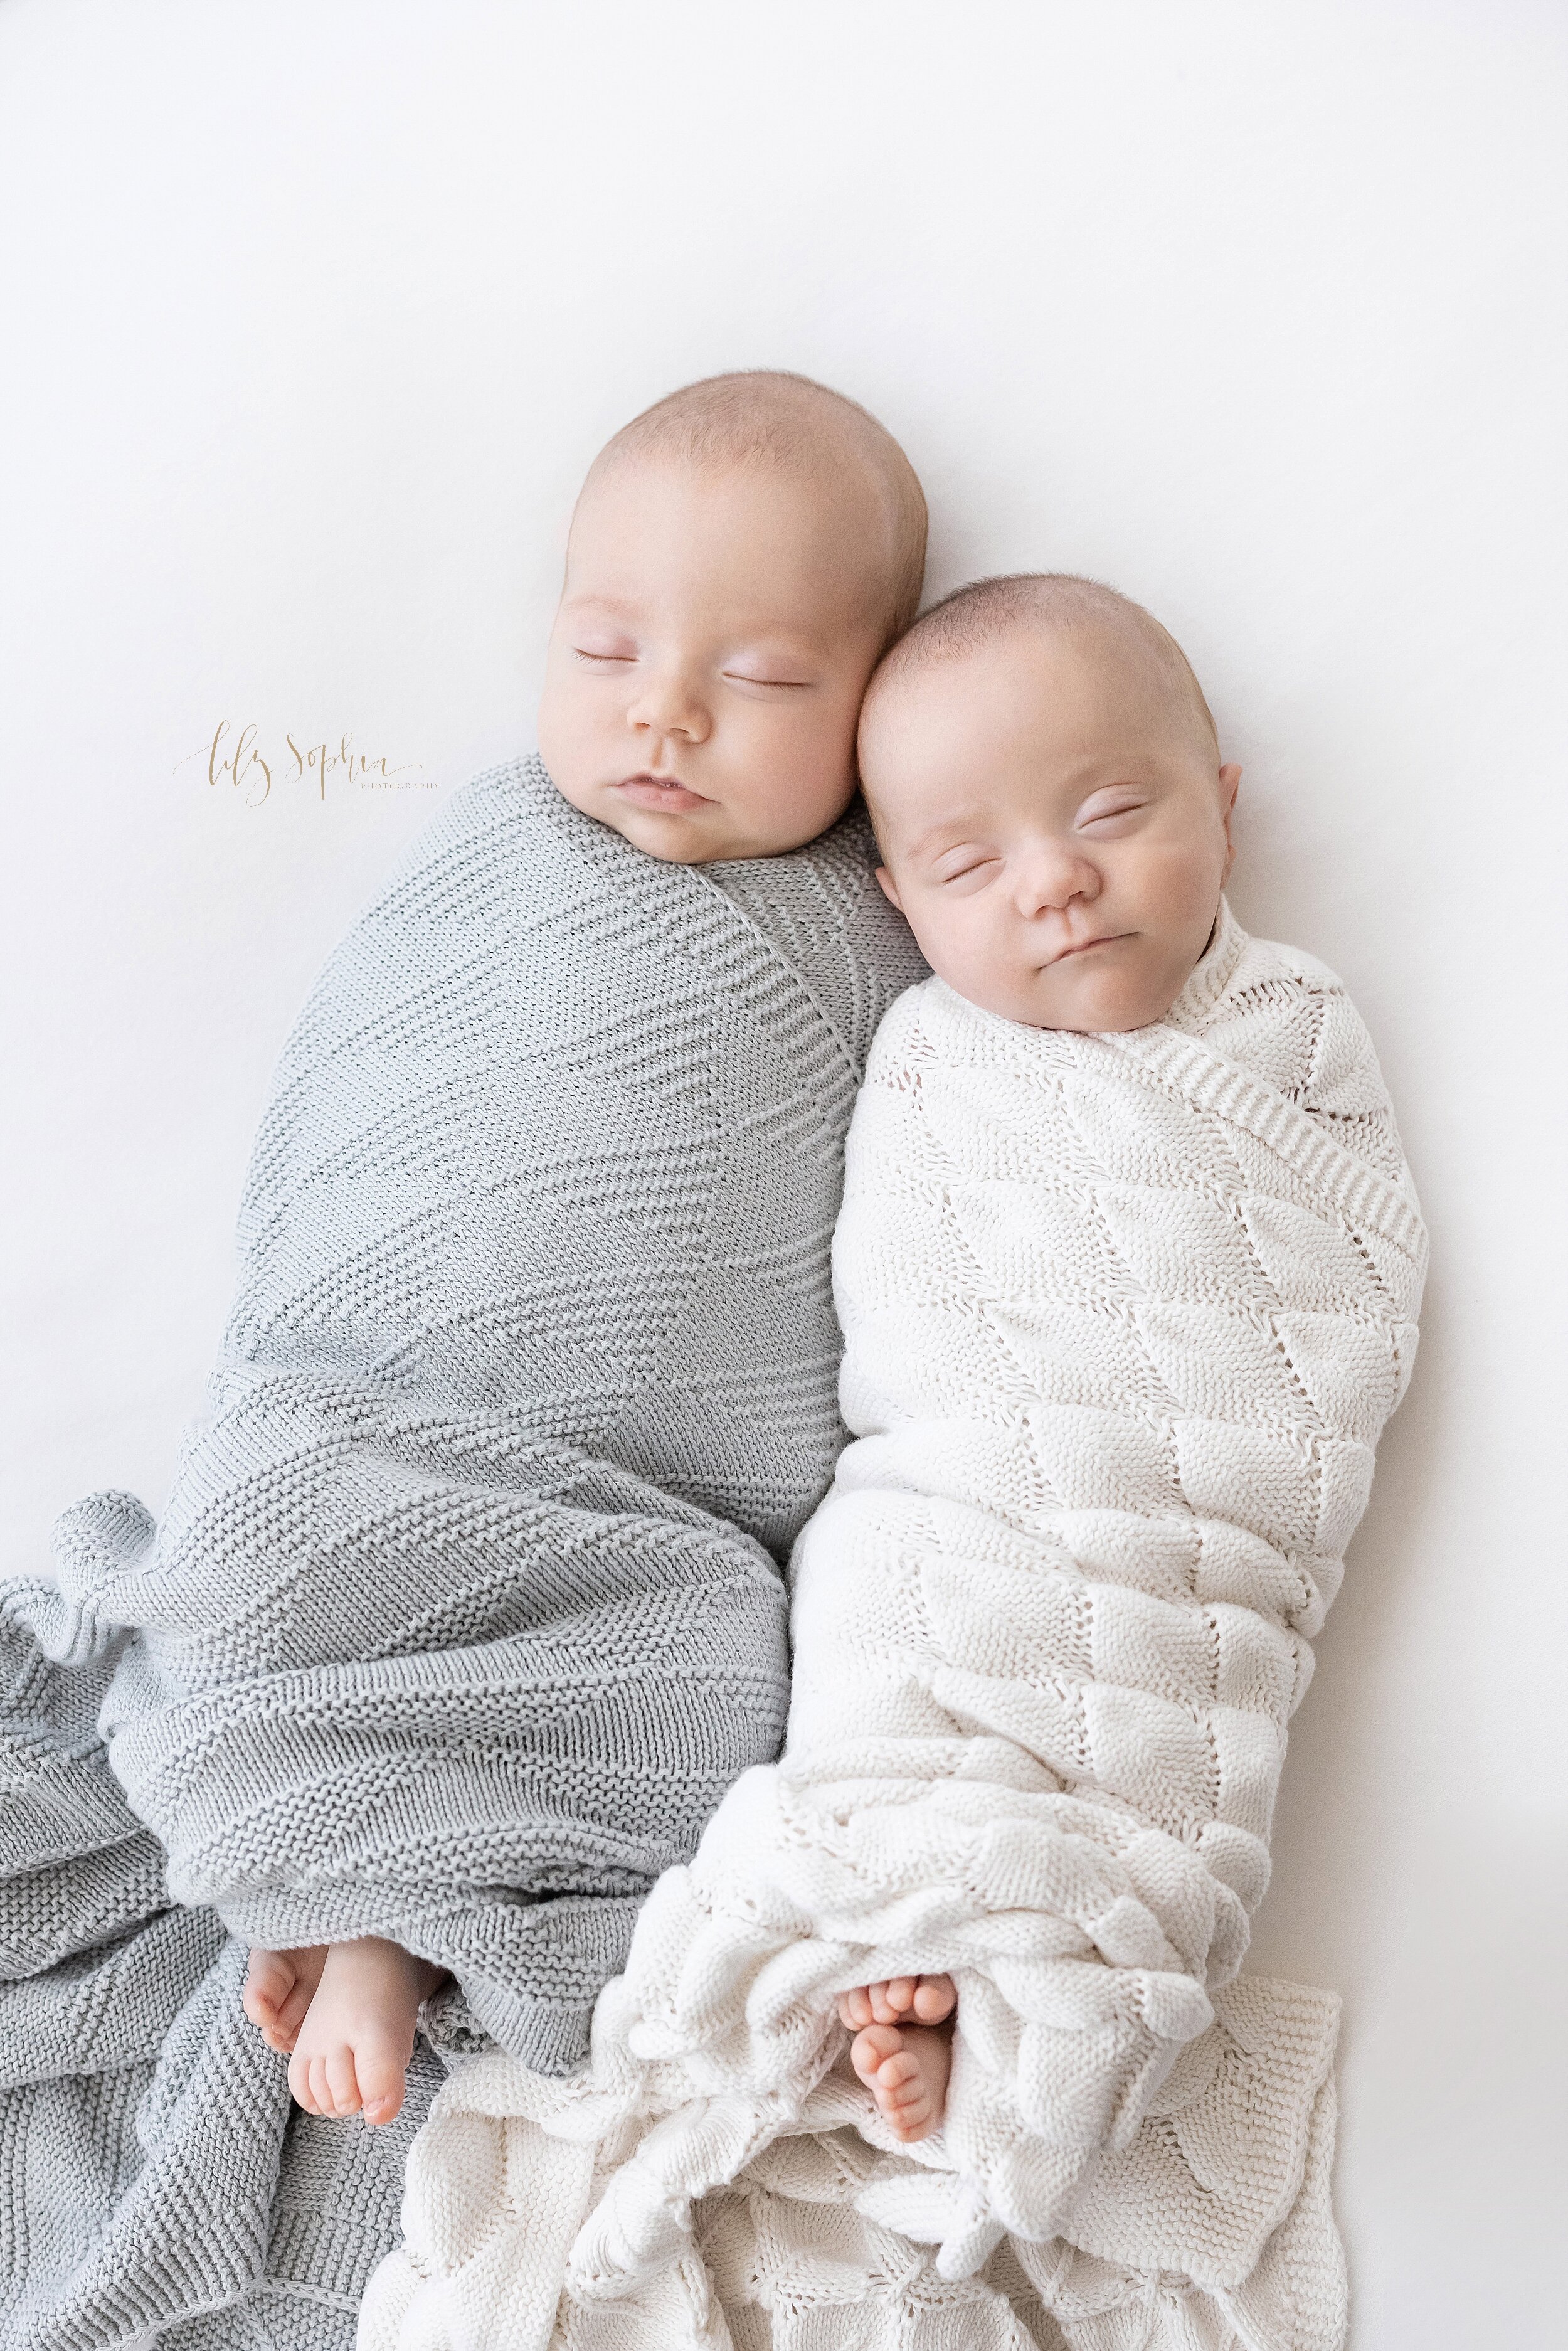  Newborn portrait of peacefully sleeping twin boys swaddled in blankets to their chins with their tiny toes peeking out lying next to one another with one of the twin’s heads touching the cheek of his brother taken in a natural light studio near Ansl